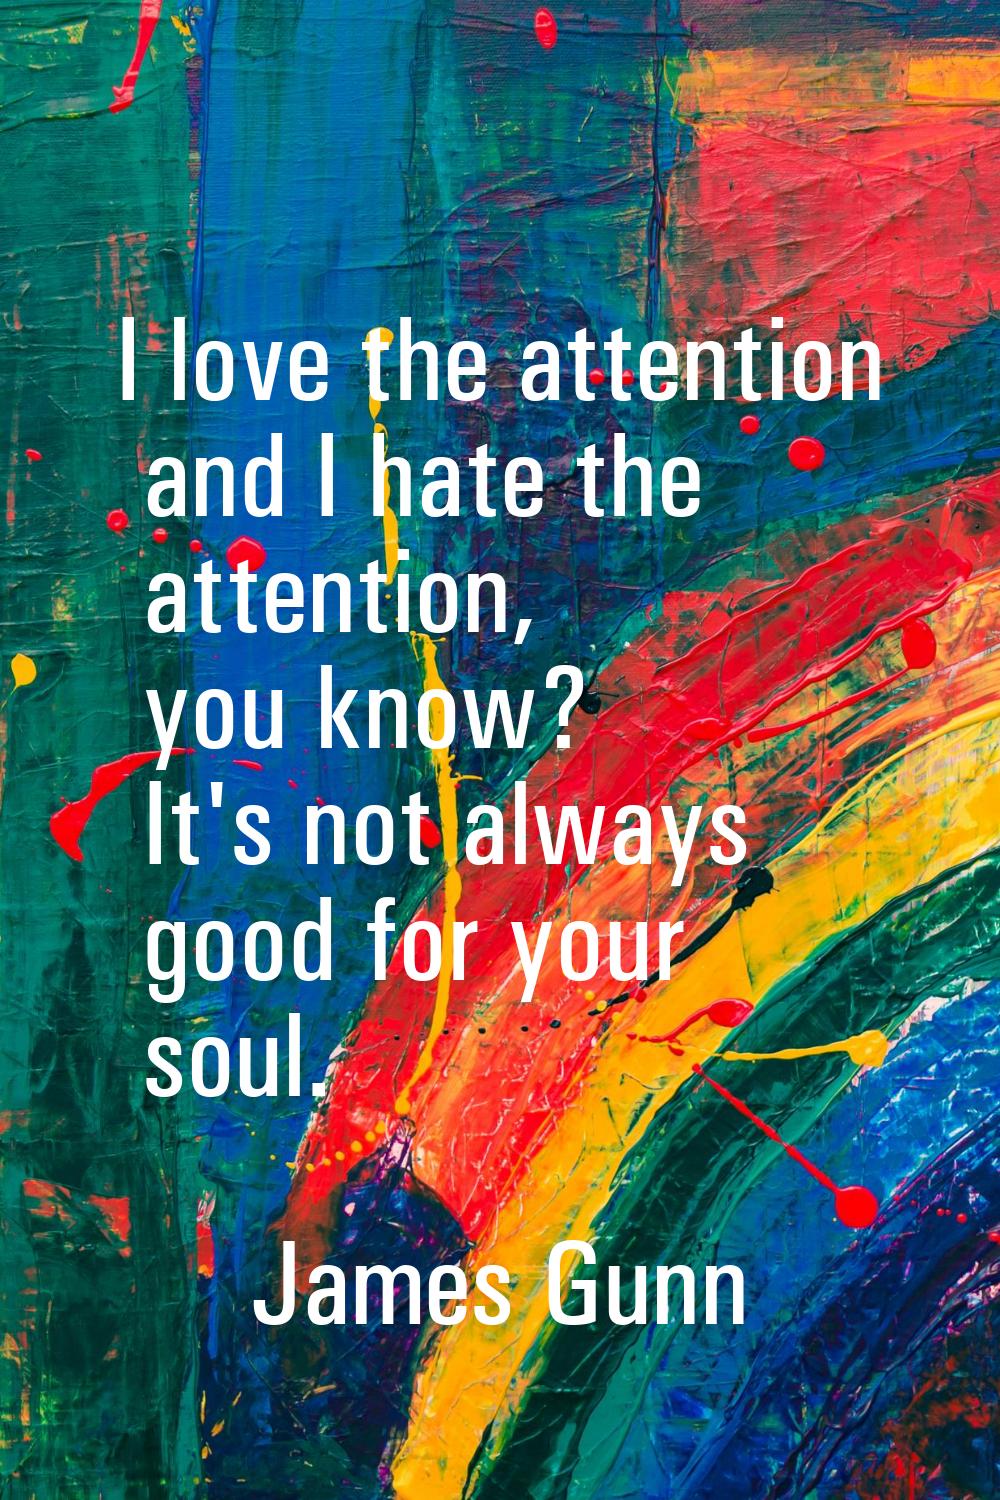 I love the attention and I hate the attention, you know? It's not always good for your soul.